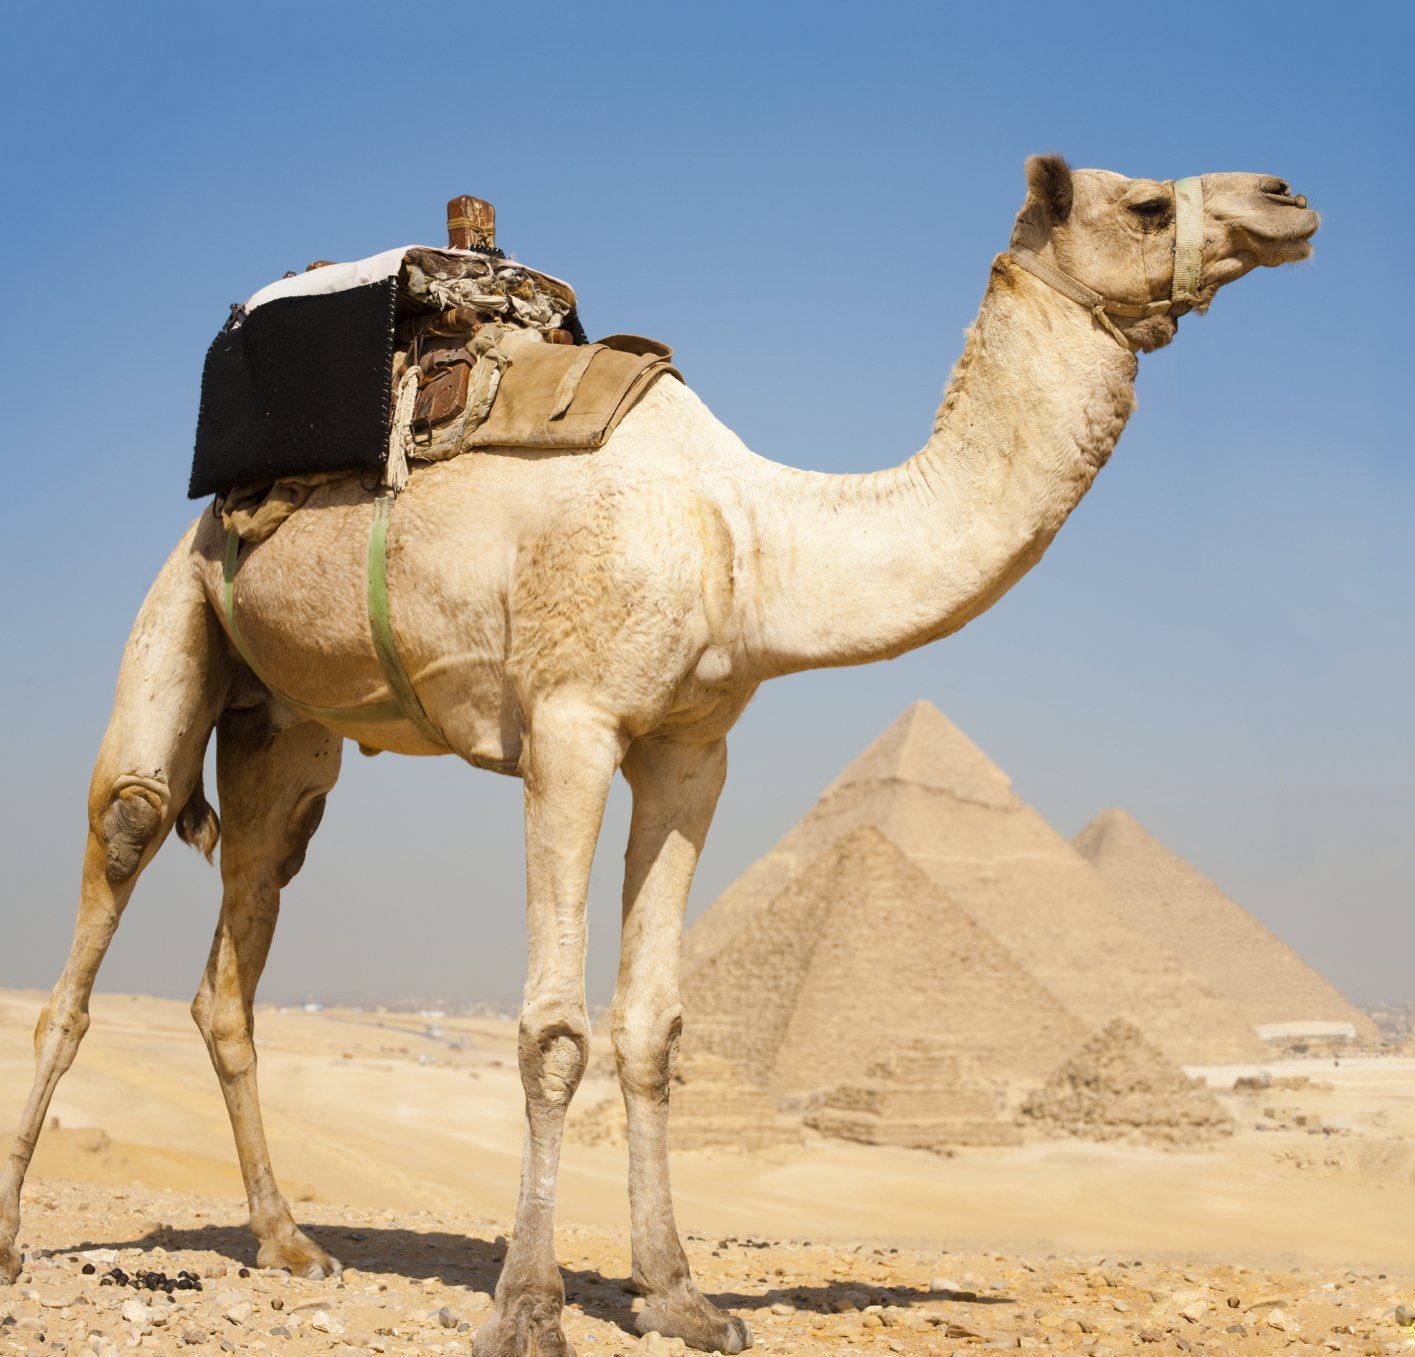 A camel saddled and ready to cross the desert.  Pyramids in the background.